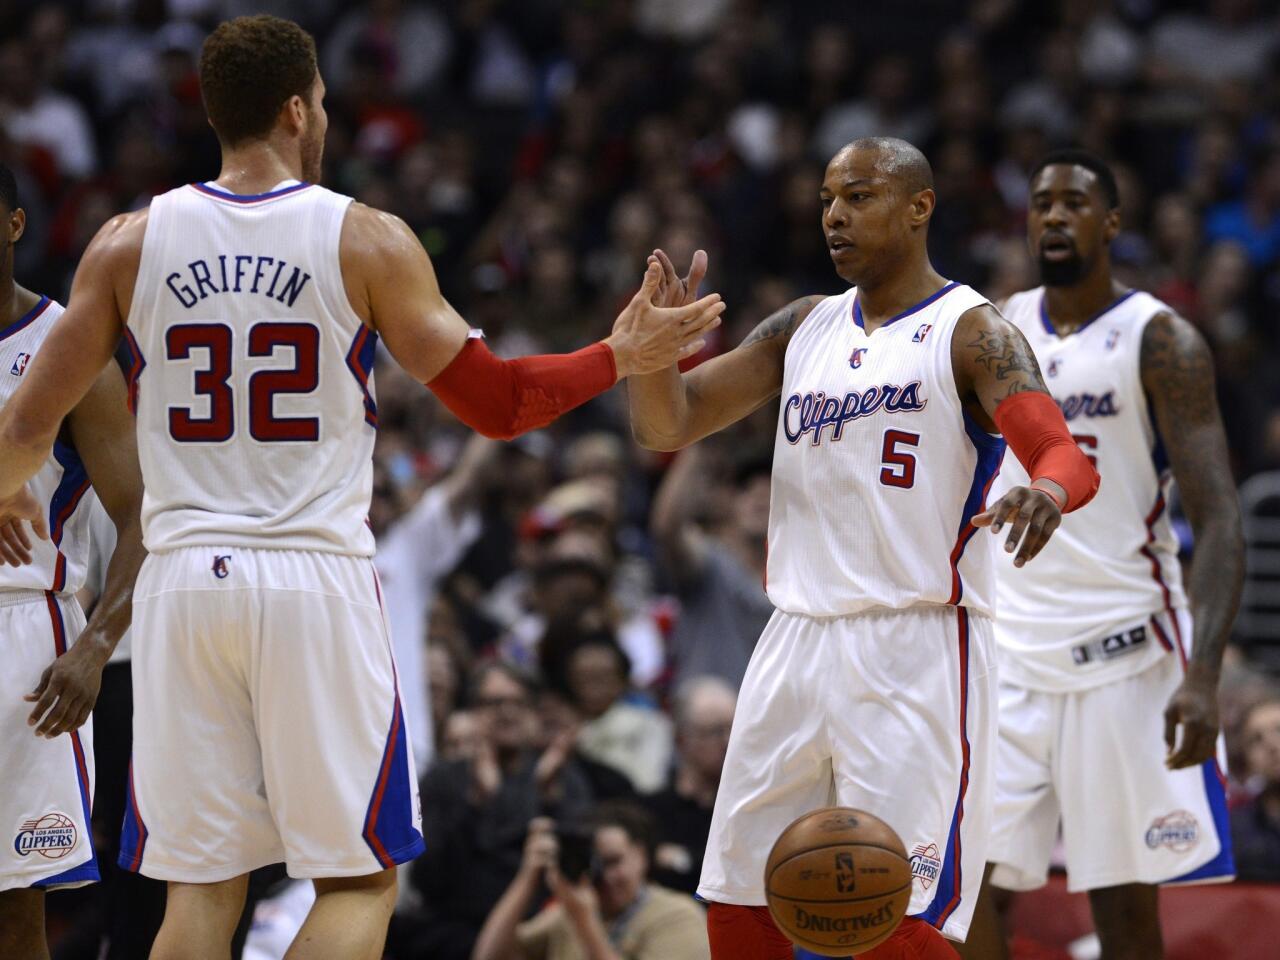 Clippes power forward Blake Griffin congratulates forward Caron Butler after he scored against the 76ers in a 101-72 victory on Wednesday night at Staples Center.